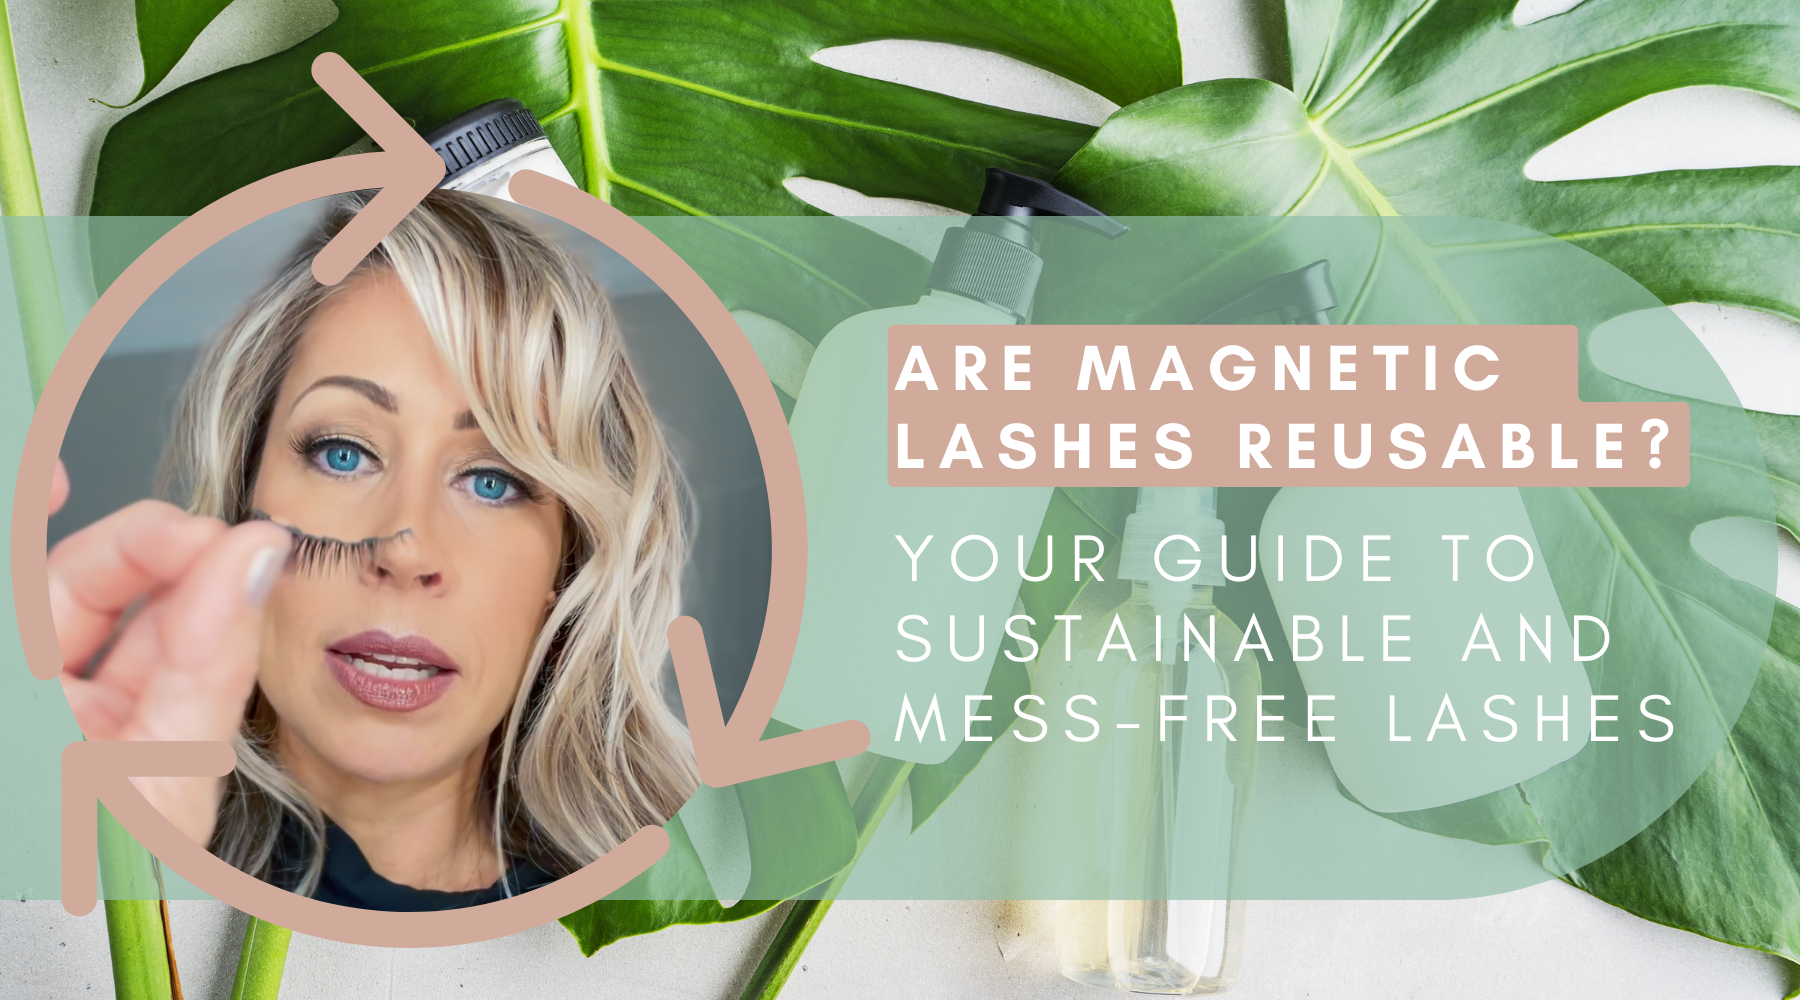 Are Magnetic Lashes Reusable Your Guide To Sustainable and Mess-free Lashes